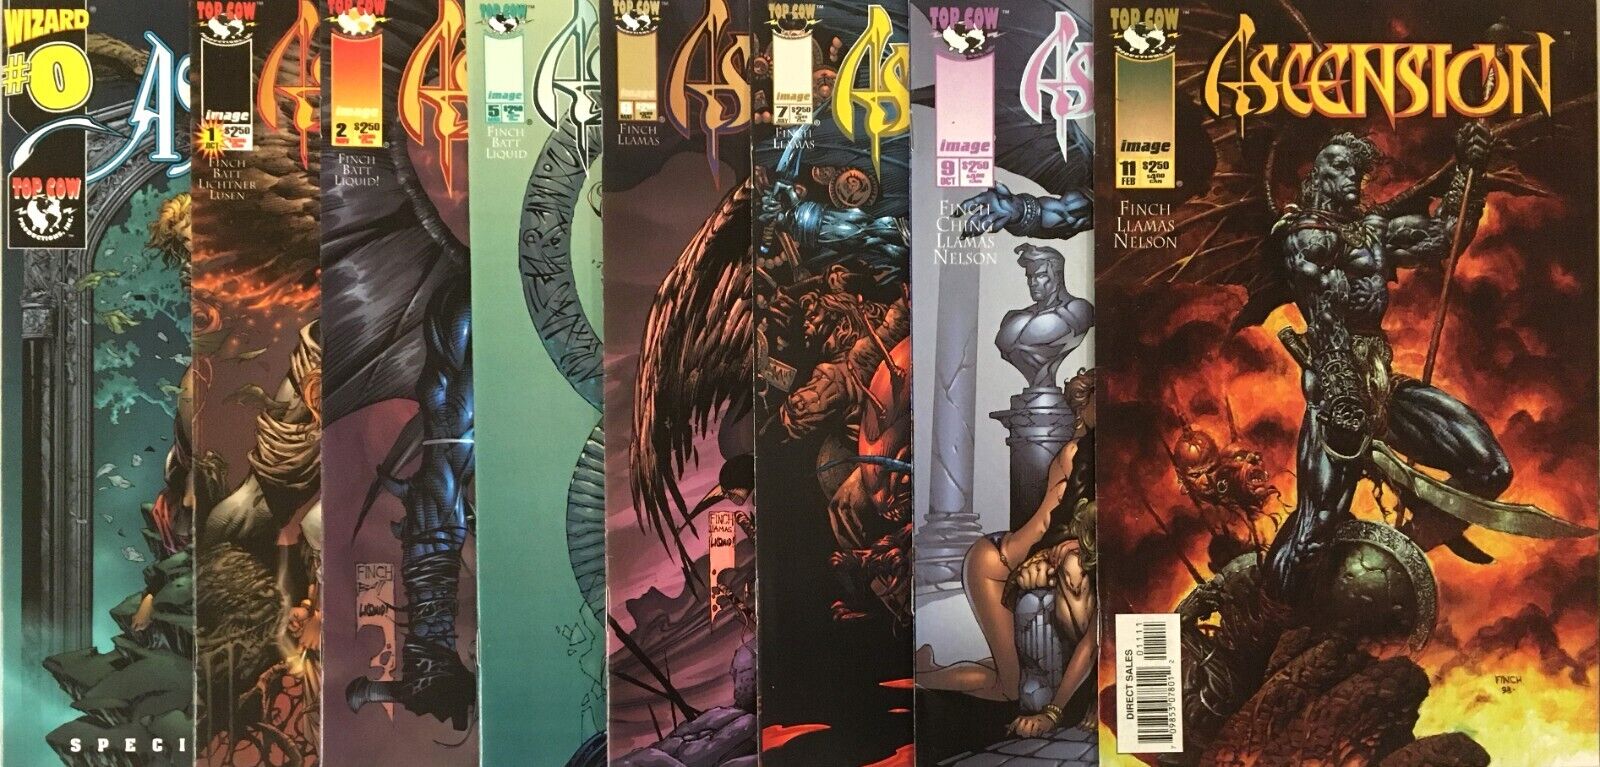 Ascension 1997 Image 8 Comic lot # 0 1 2 5 6 7 9 11 VF to NM